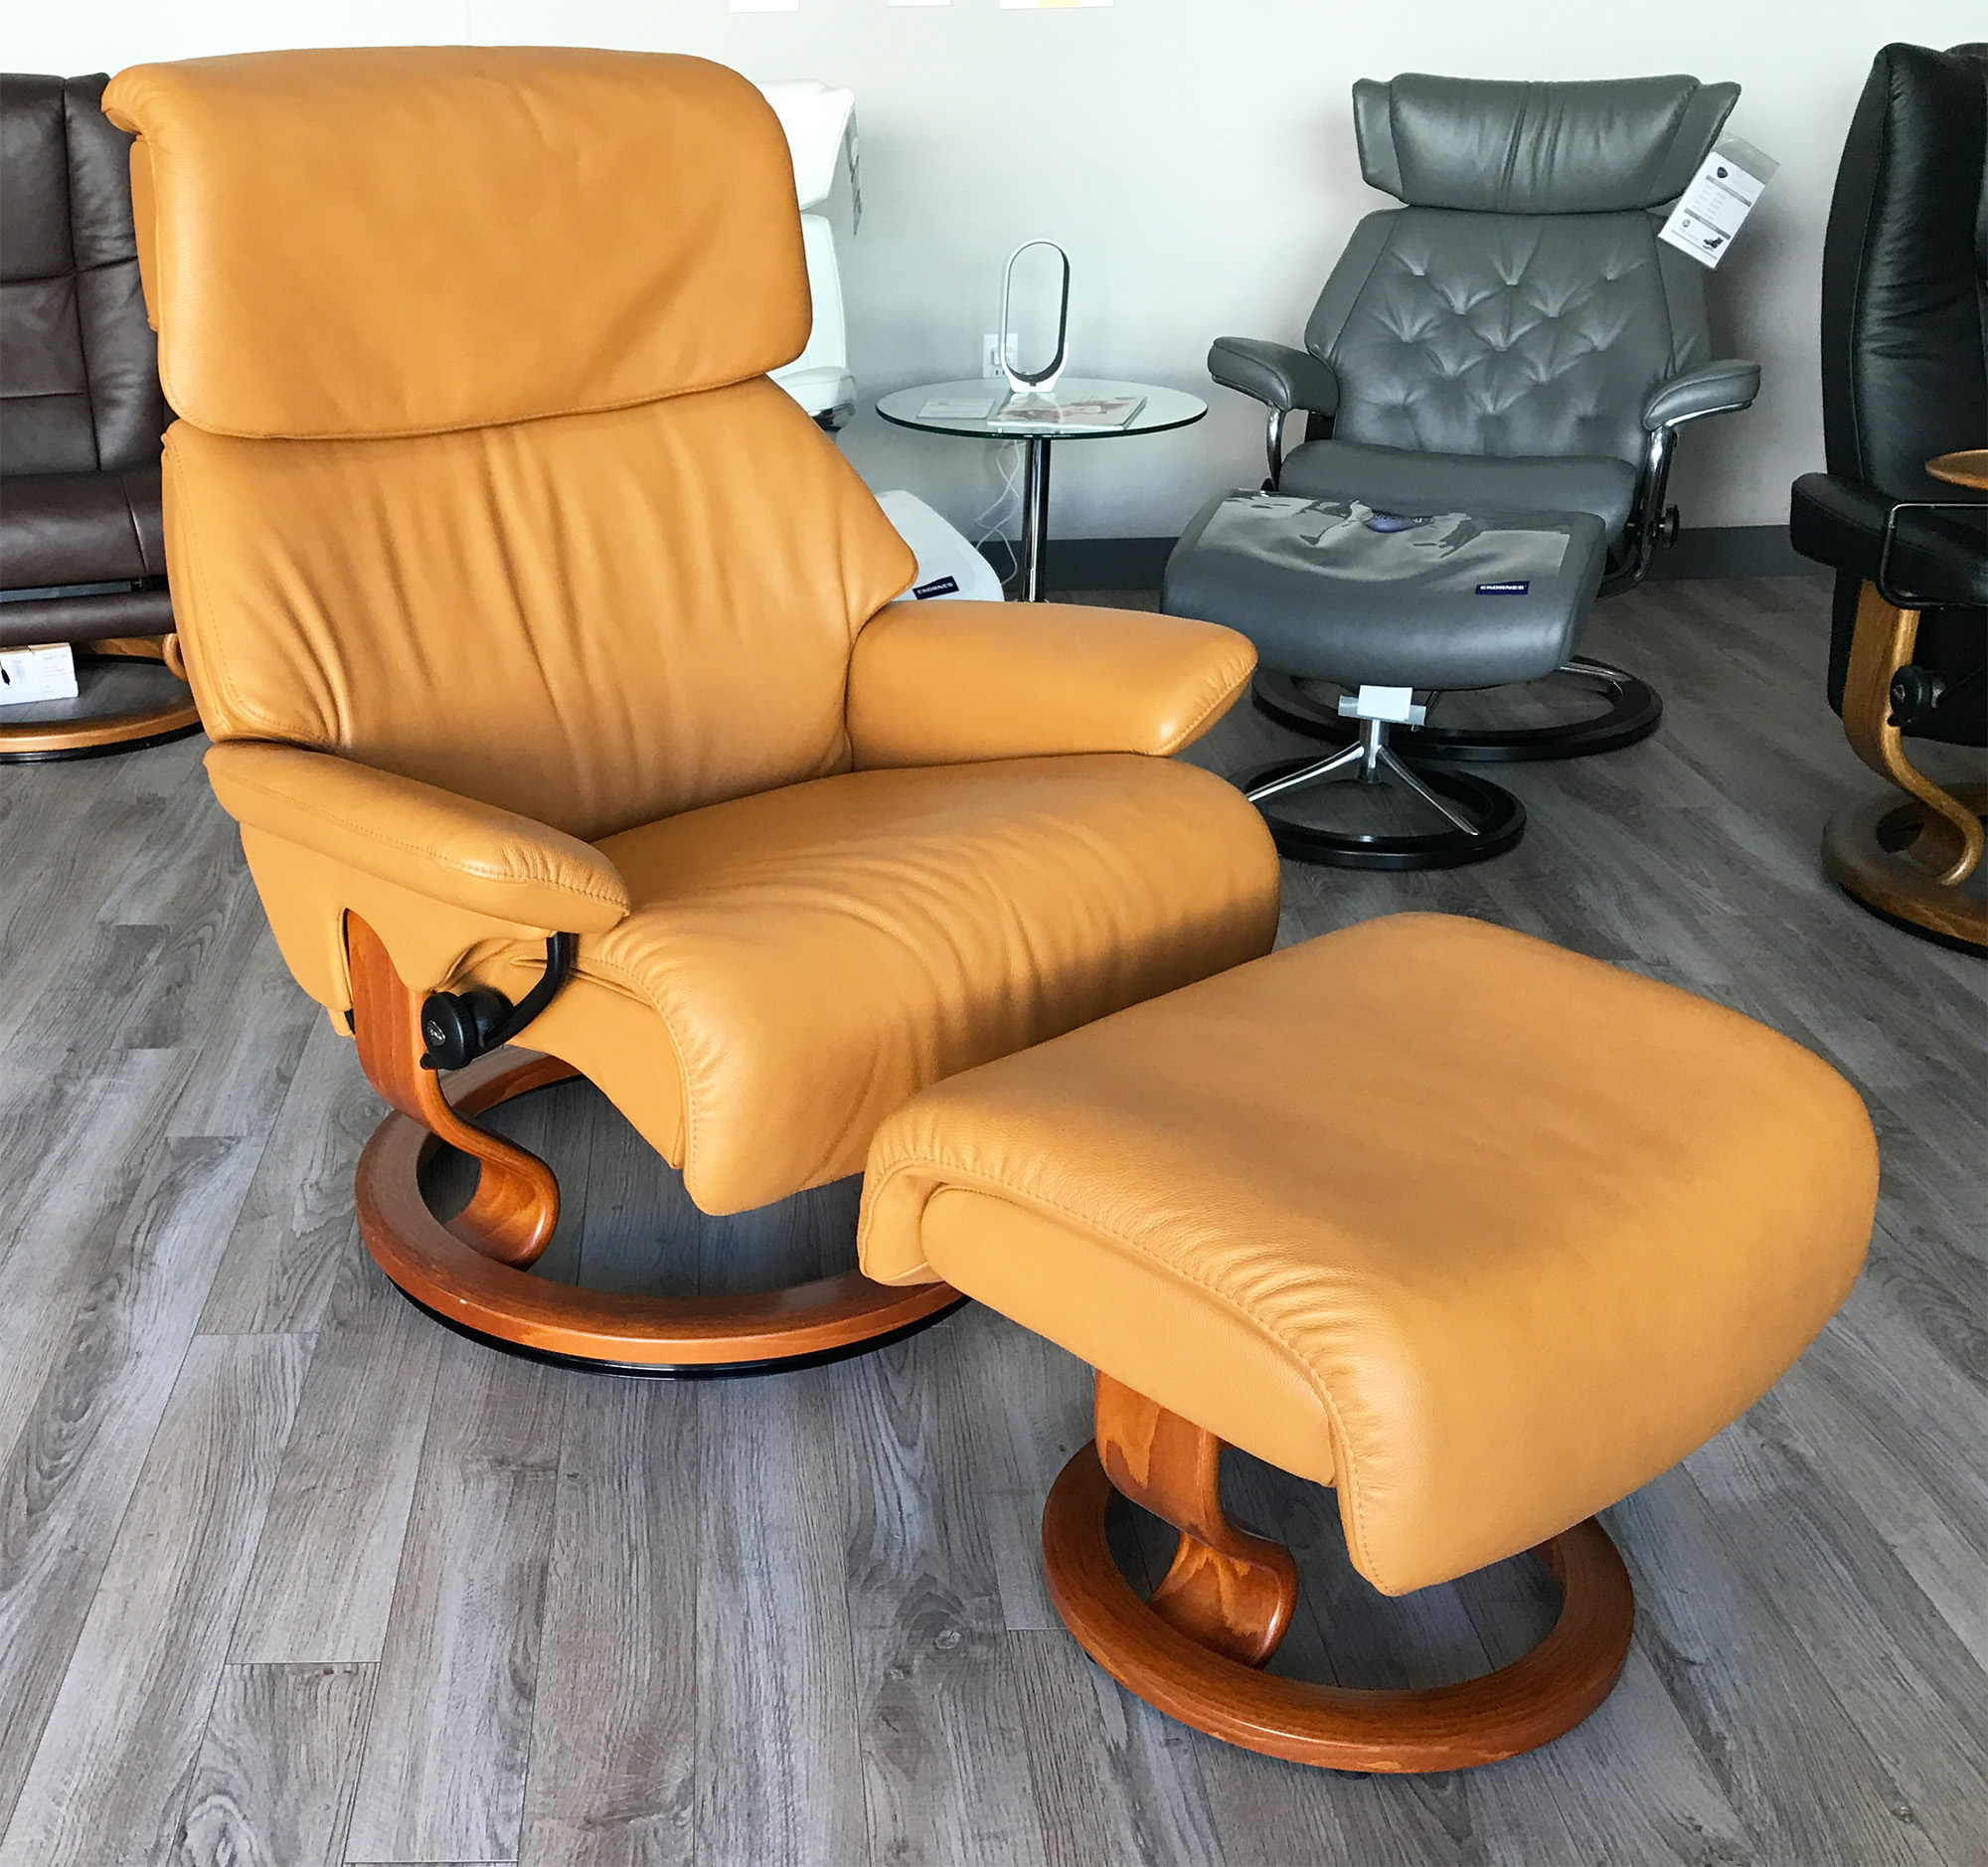 Stressless Spirit Large Dream Cori Tan Leather Recliner Chair and Ottoman  by Ekornes - Stressless Spirit Large Dream Cori Tan Leather Chairs Recliners